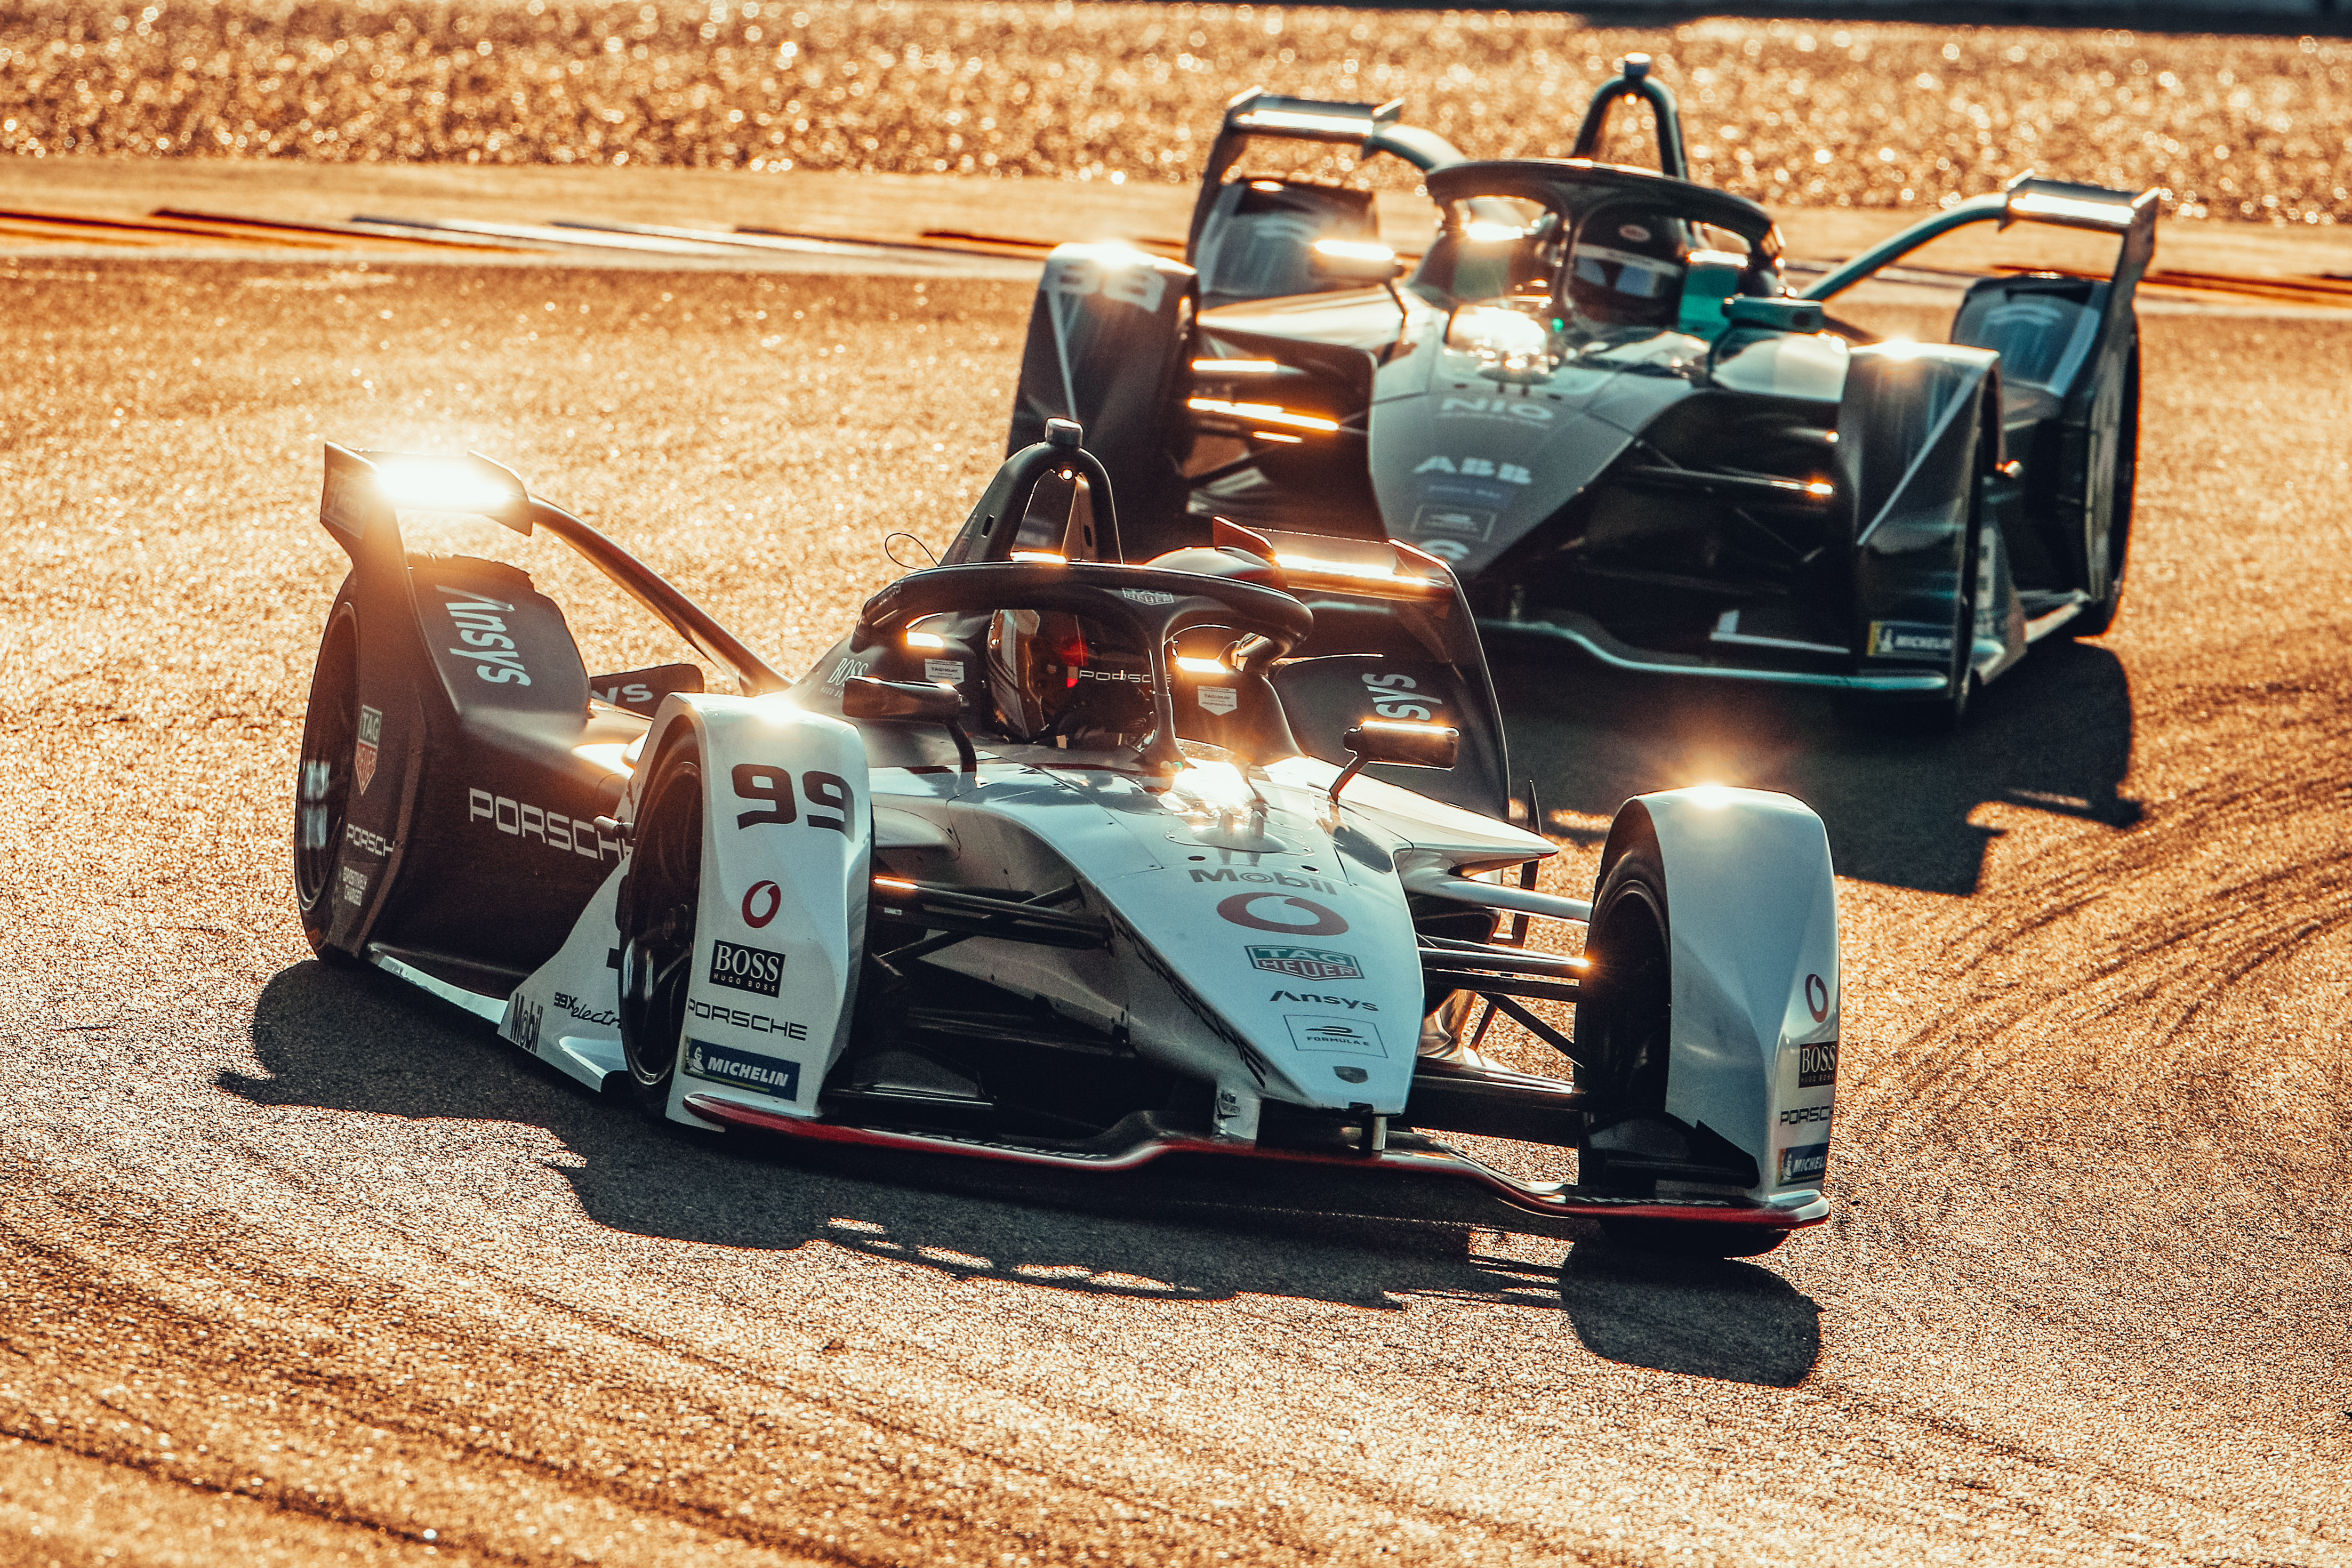 Two Formula E cars battle for supremacy on the track